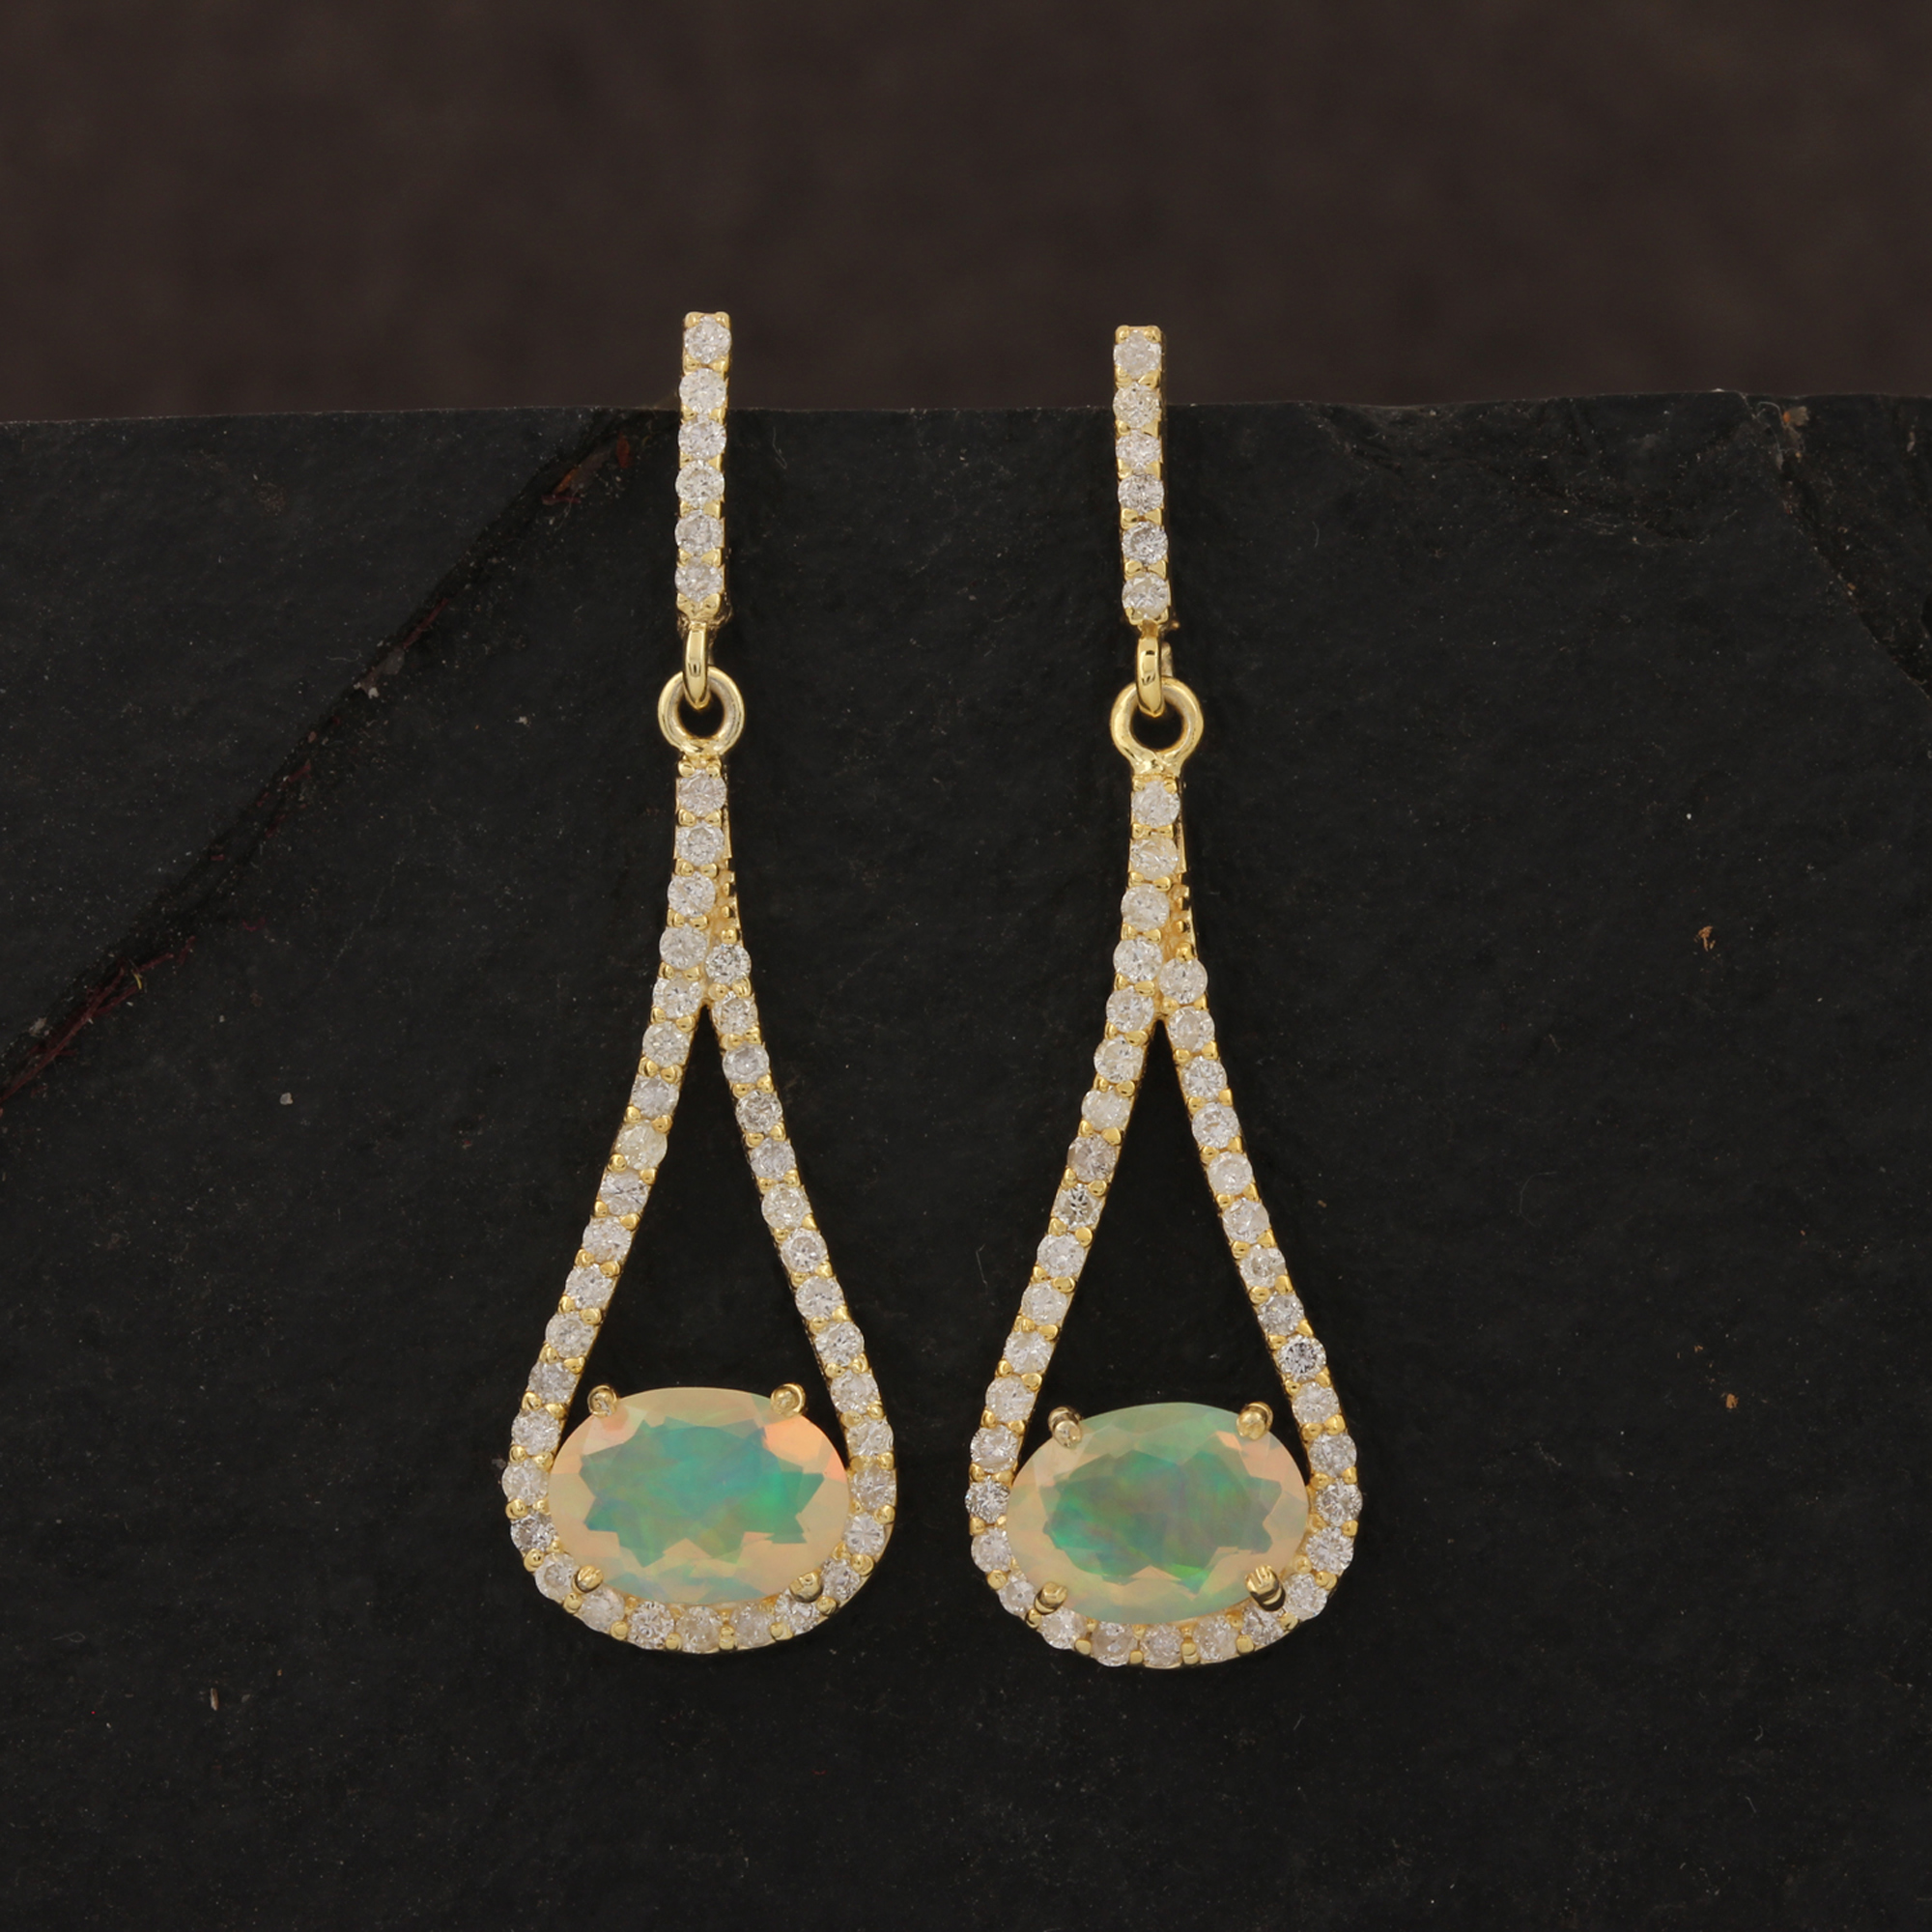 14k Solid Gold Dangle Earrings Studded With Diamond & Natural Opal Gemstone